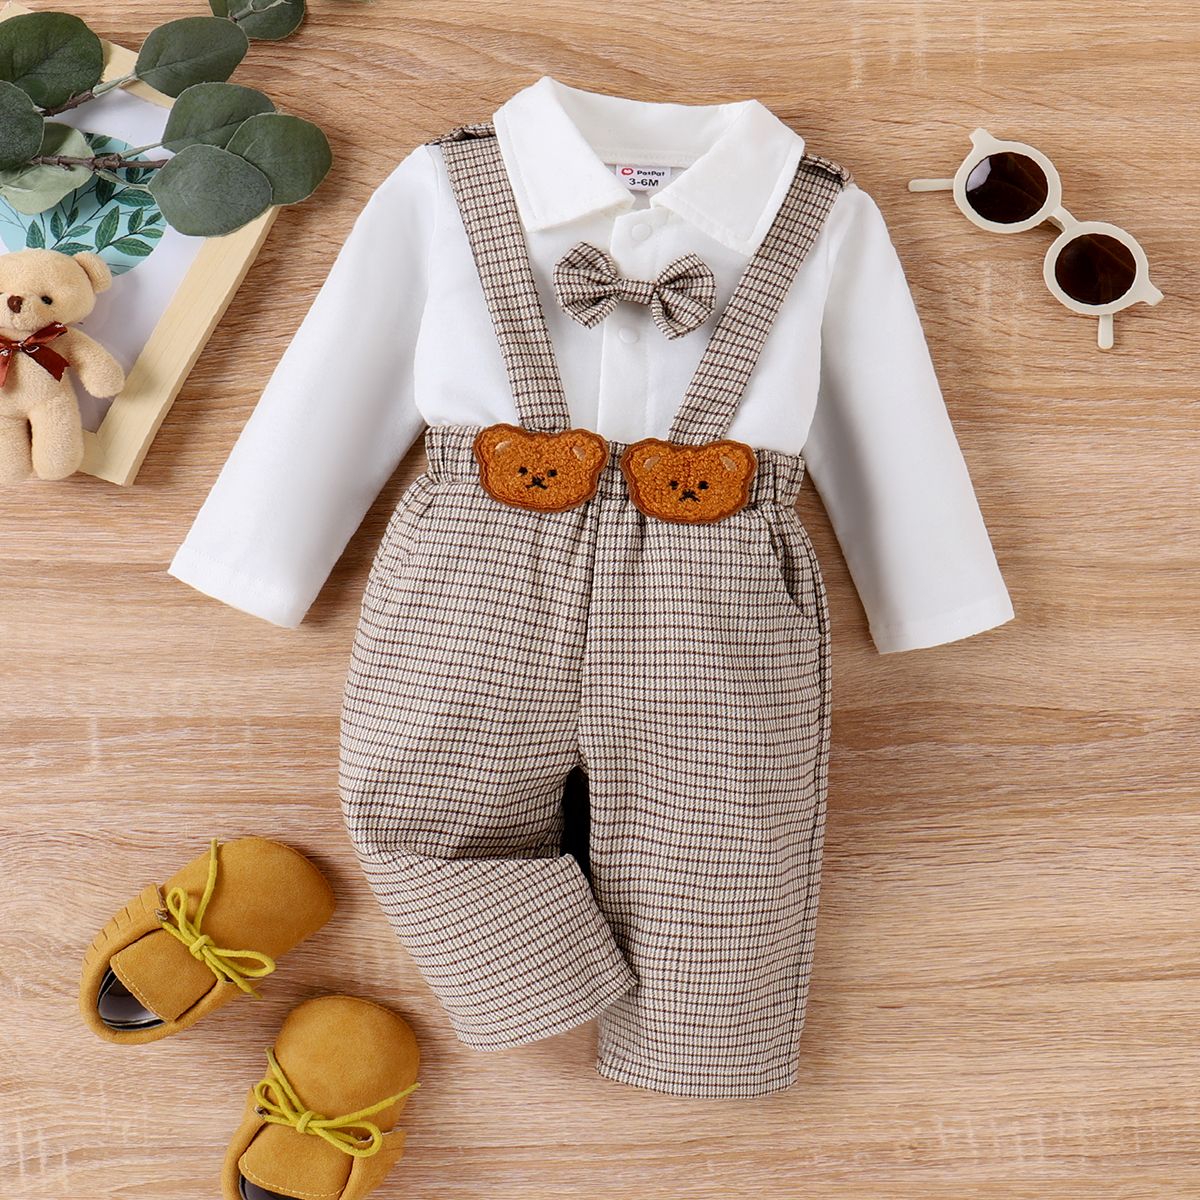 2pcs Baby Boy Plaid Bow Tie Long-sleeve Shirt and Bear Embroidery Plaid Suspender Pants Set